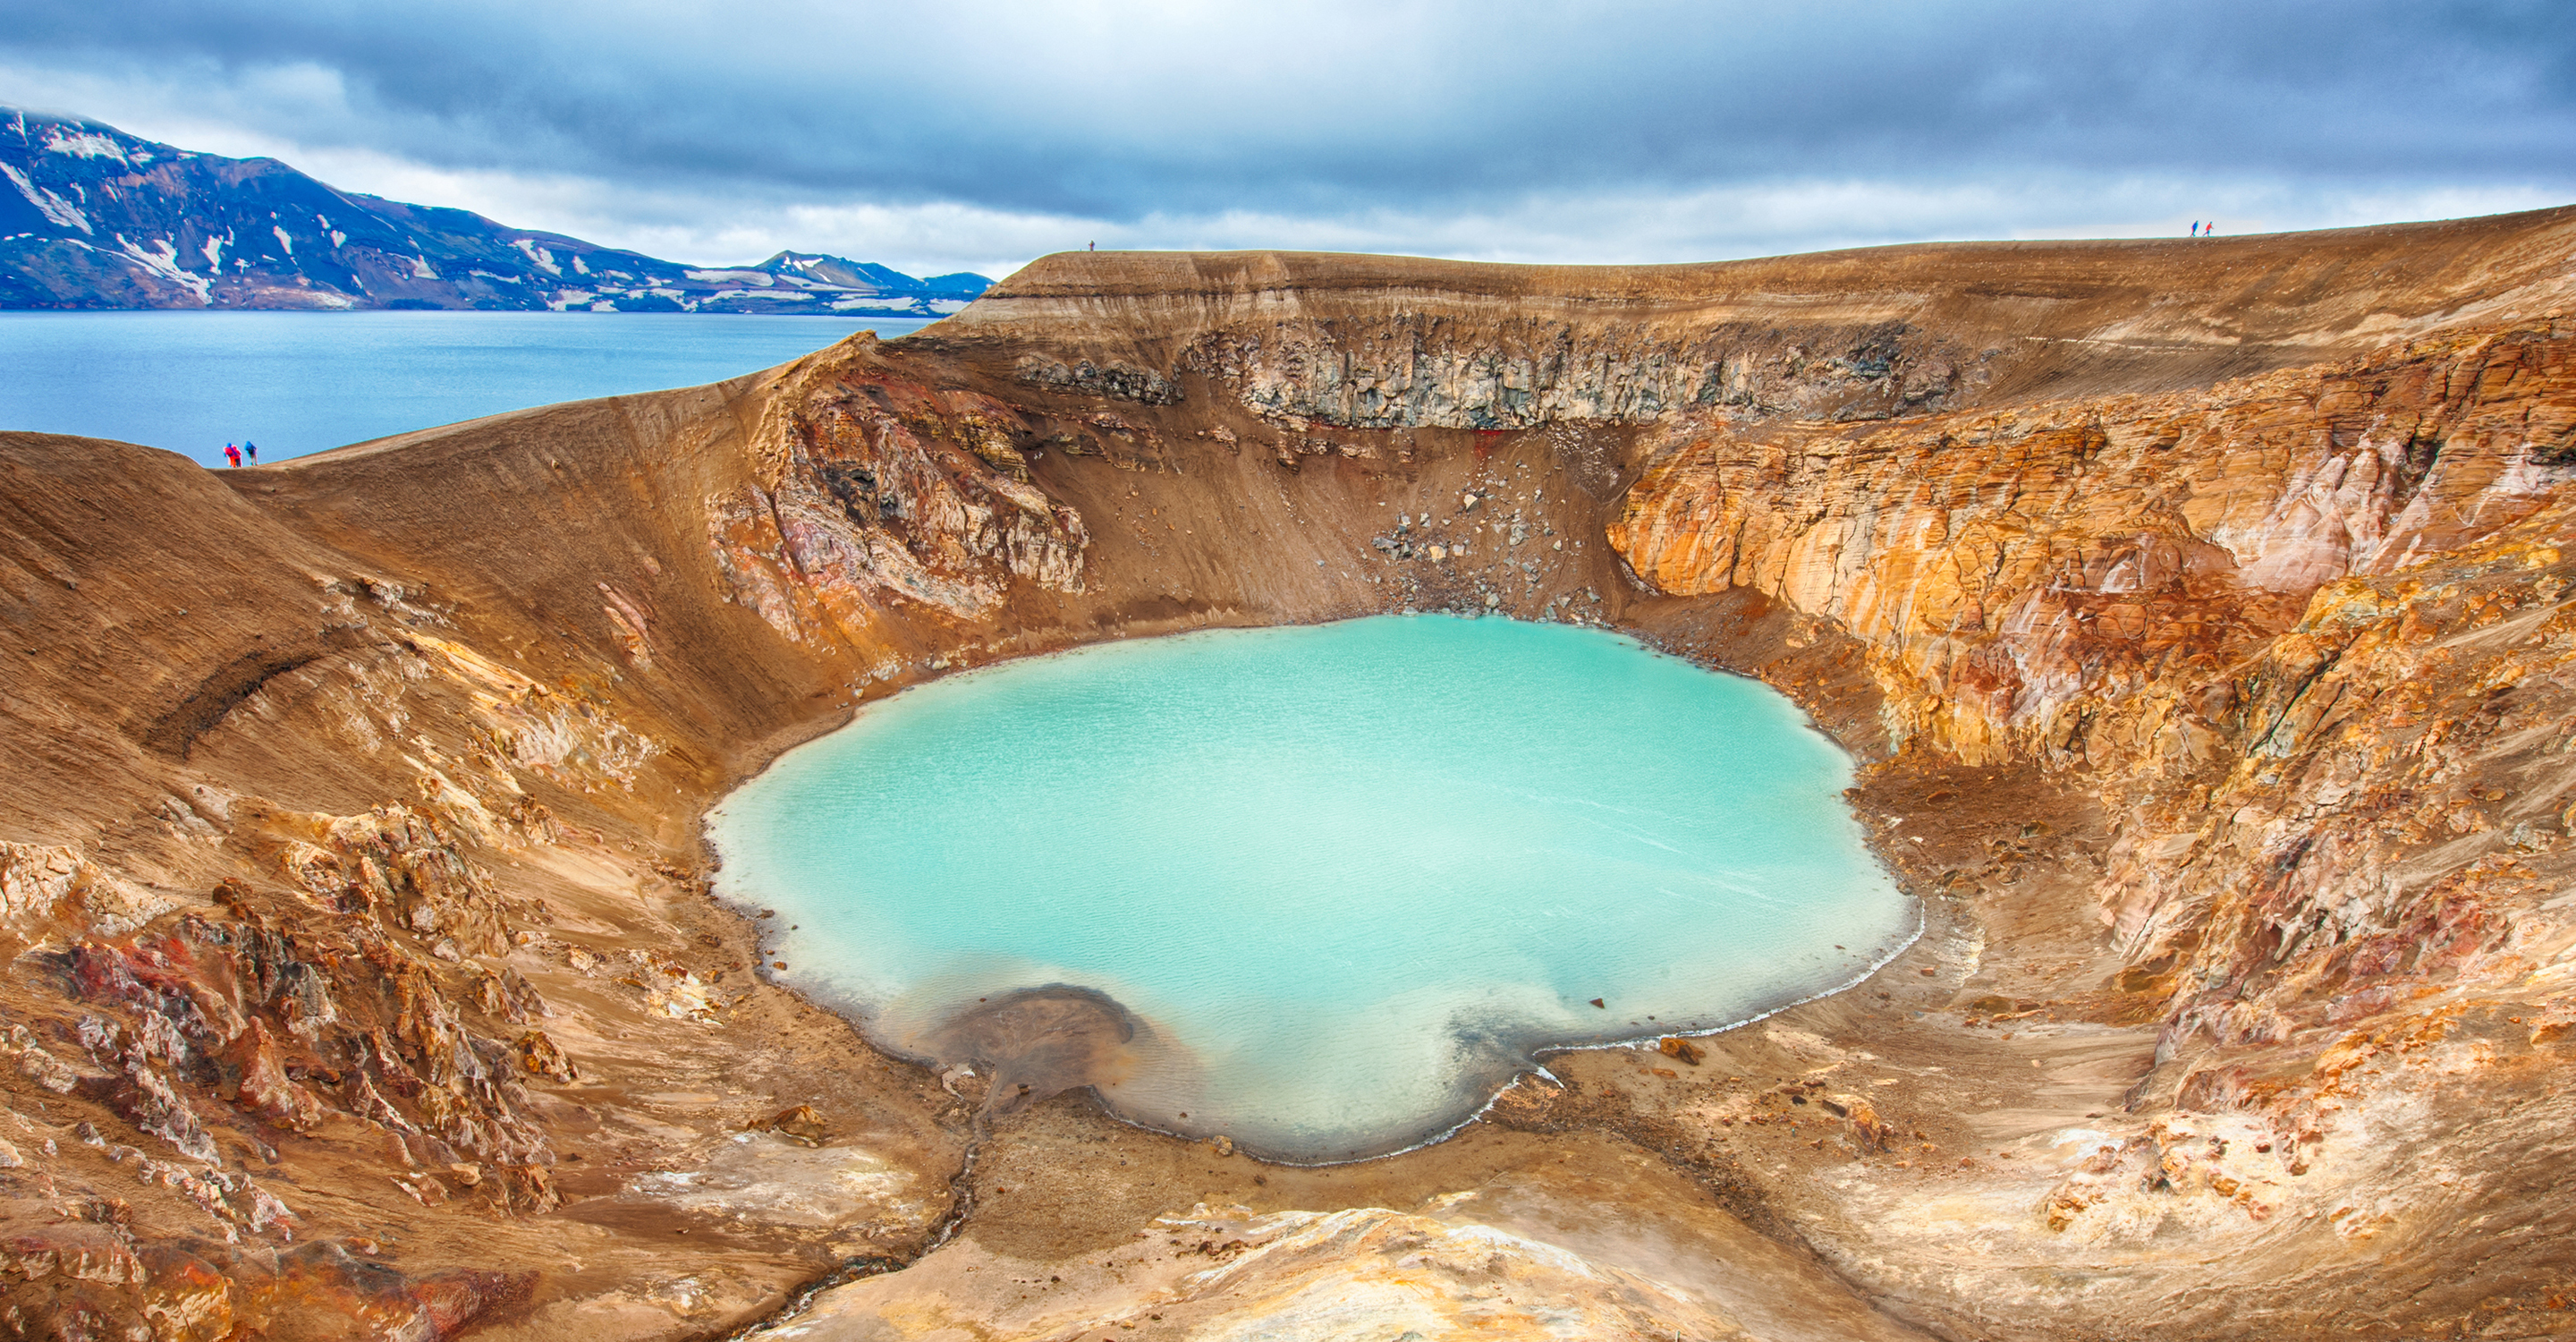 View from Askja volcano of Viti and Oskjuvatn crater lakes, Iceland, Europe